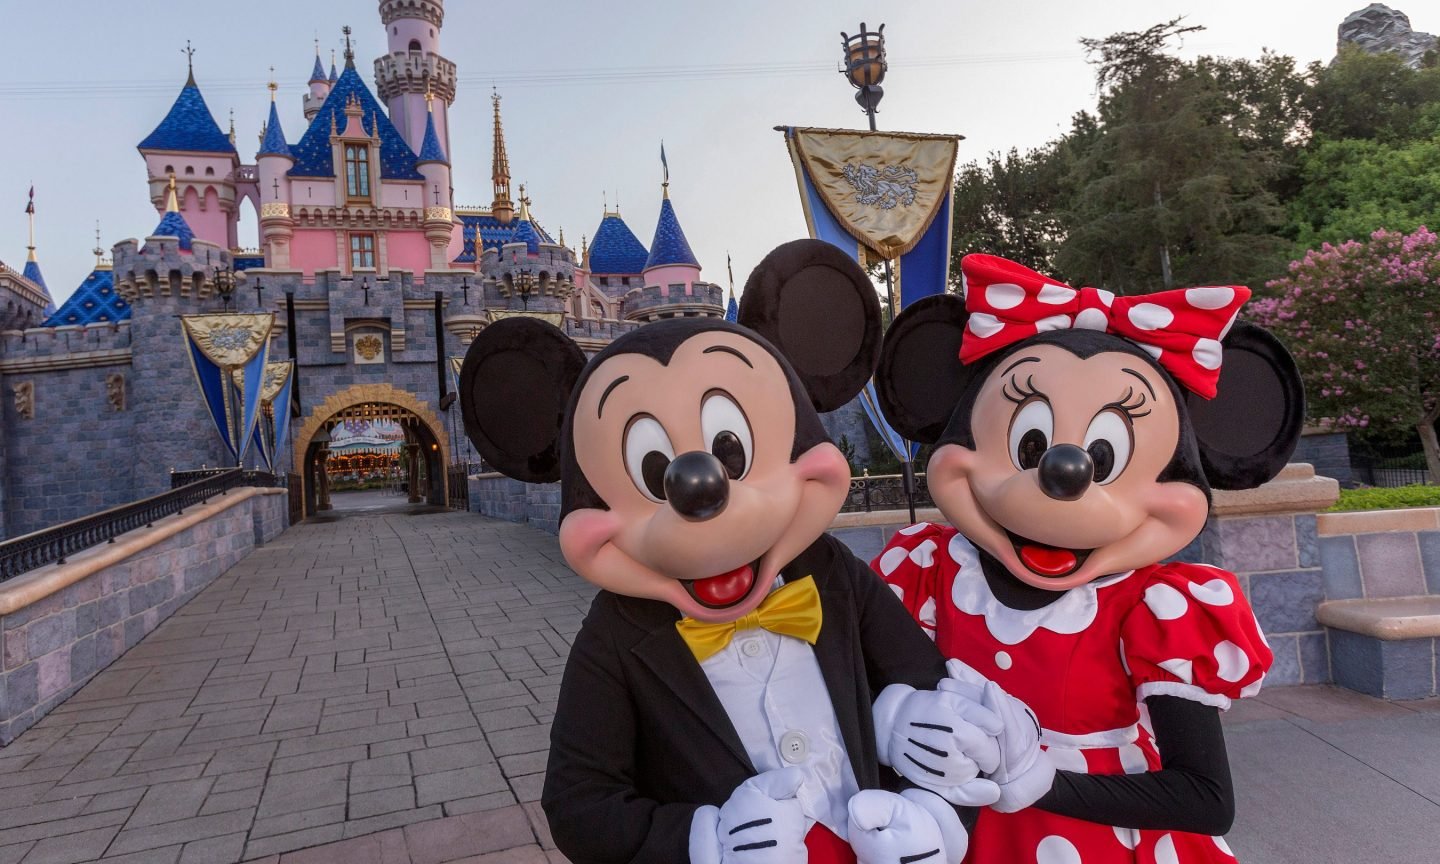 How to Purchase Theme Park Tickets With Points - NerdWallet